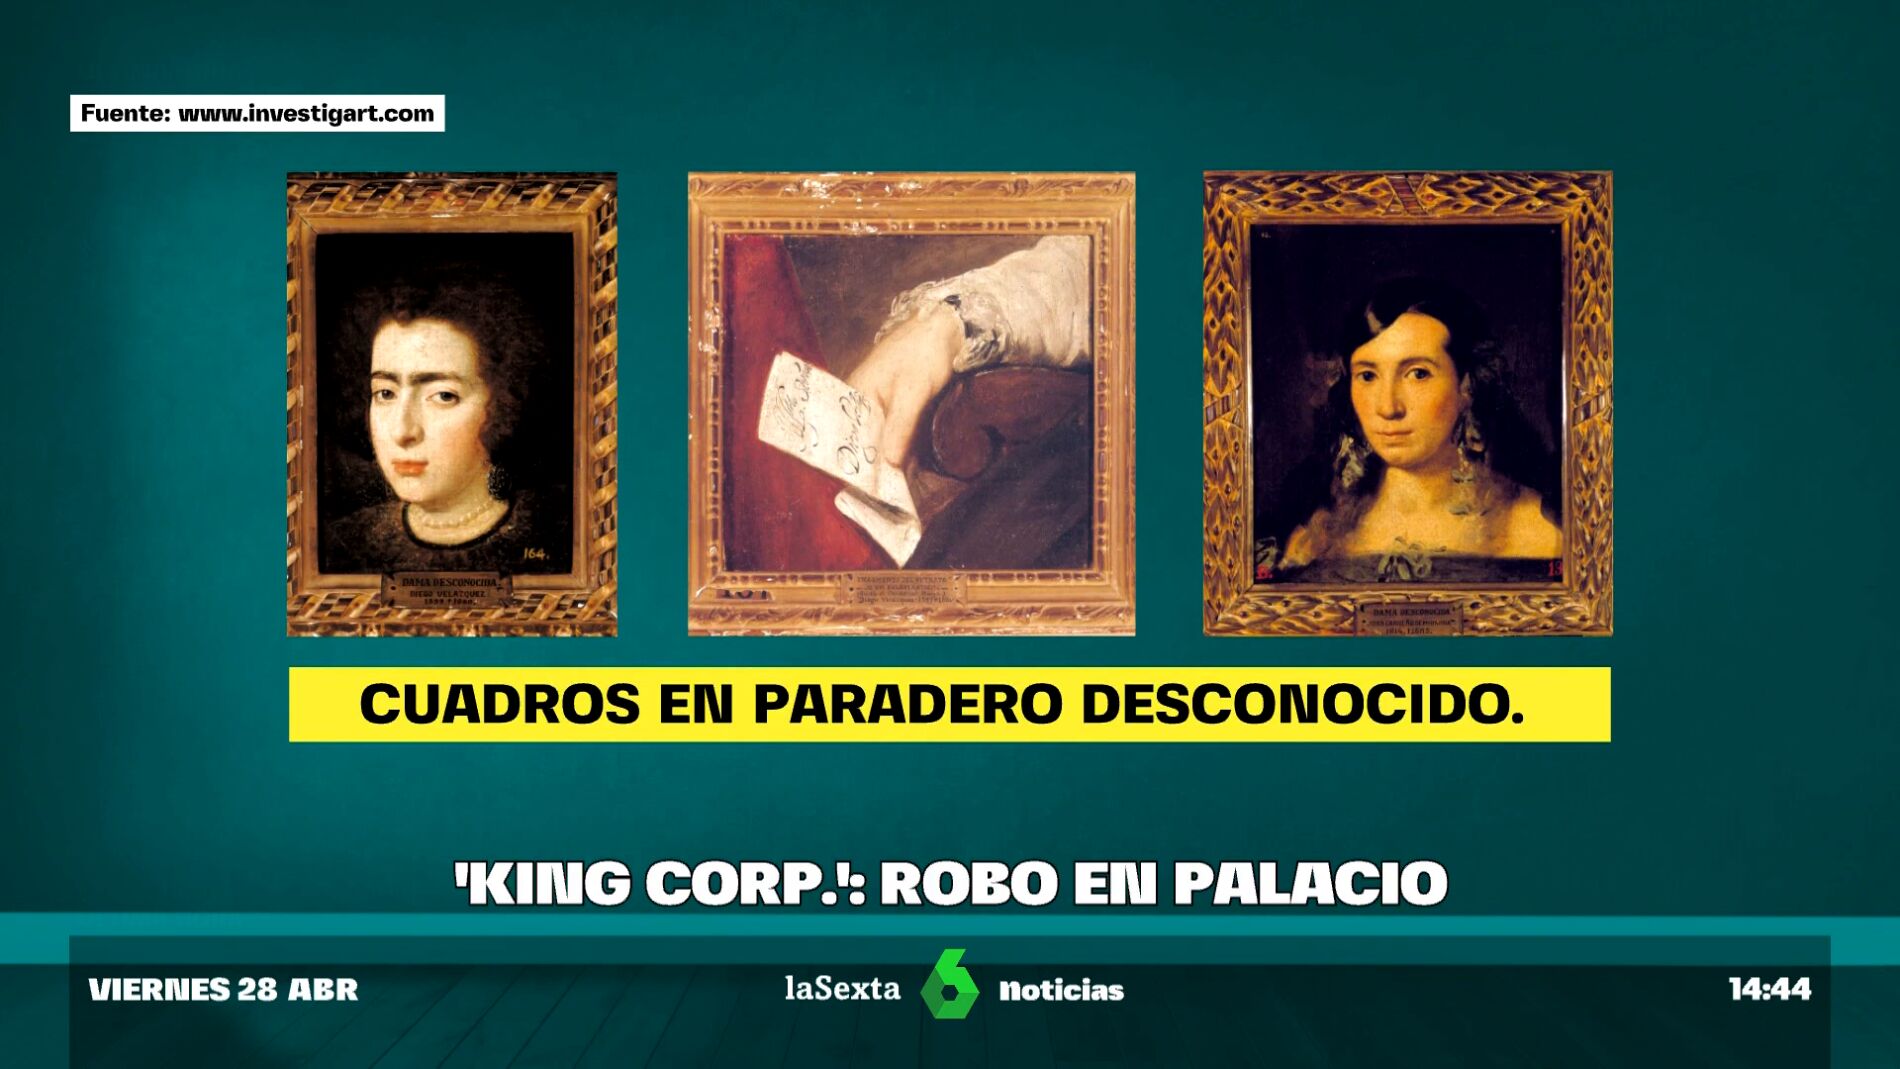 The mystery of the missing paintings from the Royal Palace that would have ended up in the house of one of the former king's mistresses